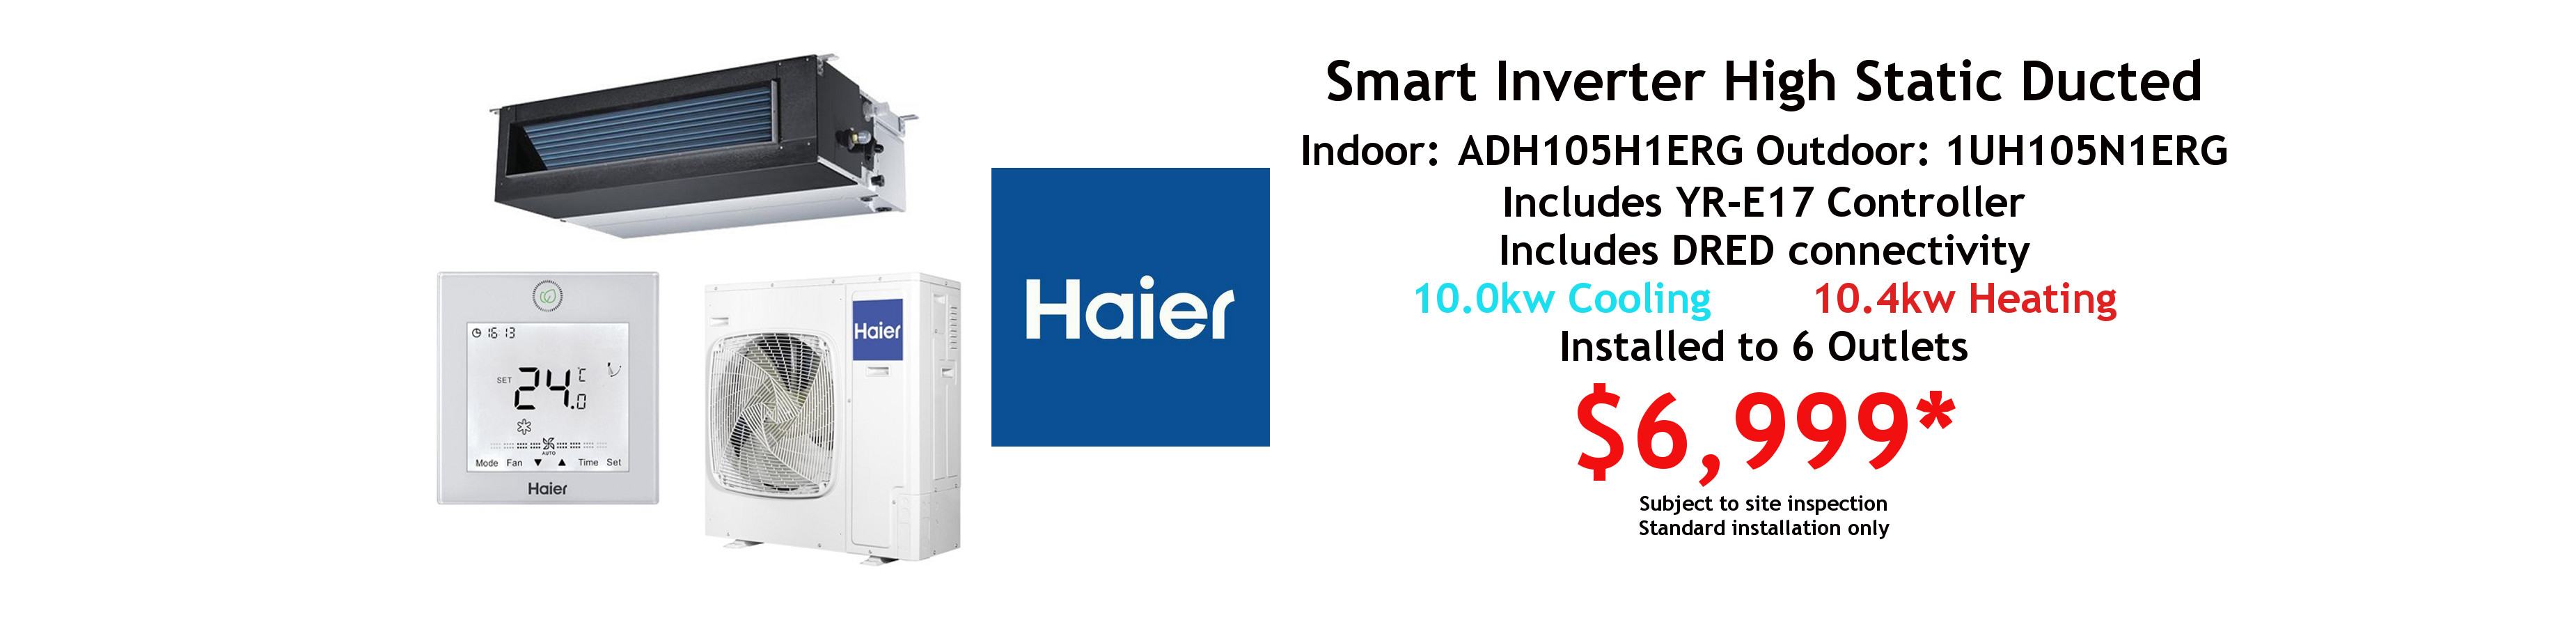 Special-haier-10kw-1024x249